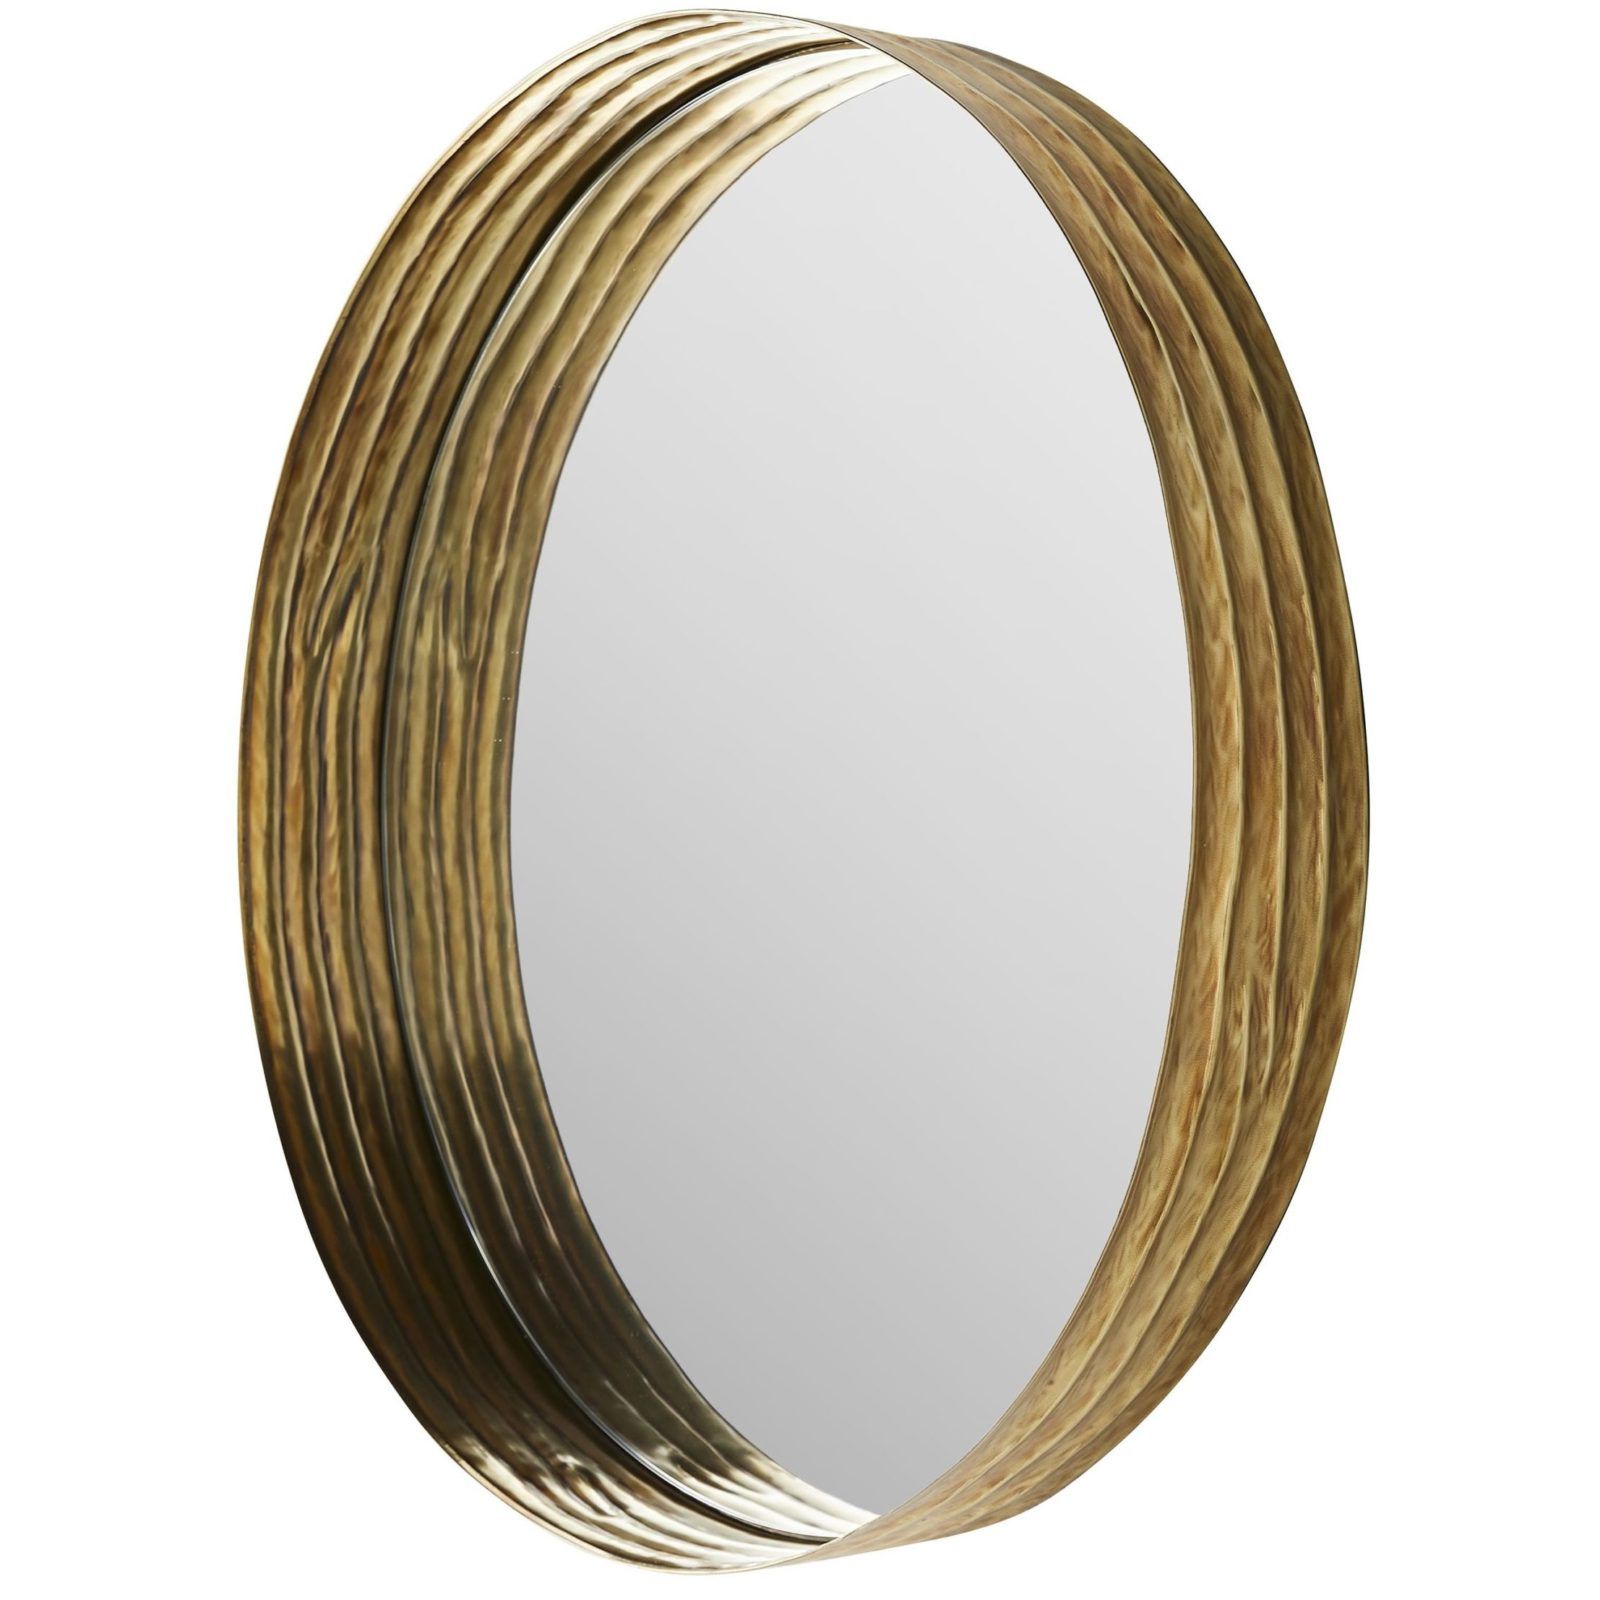 Gold Rounded Edge Mirrors Pertaining To Most Recently Released Round Gold Wall Mirror – Antique Brass Round Decorative Wall Mirror (View 4 of 15)